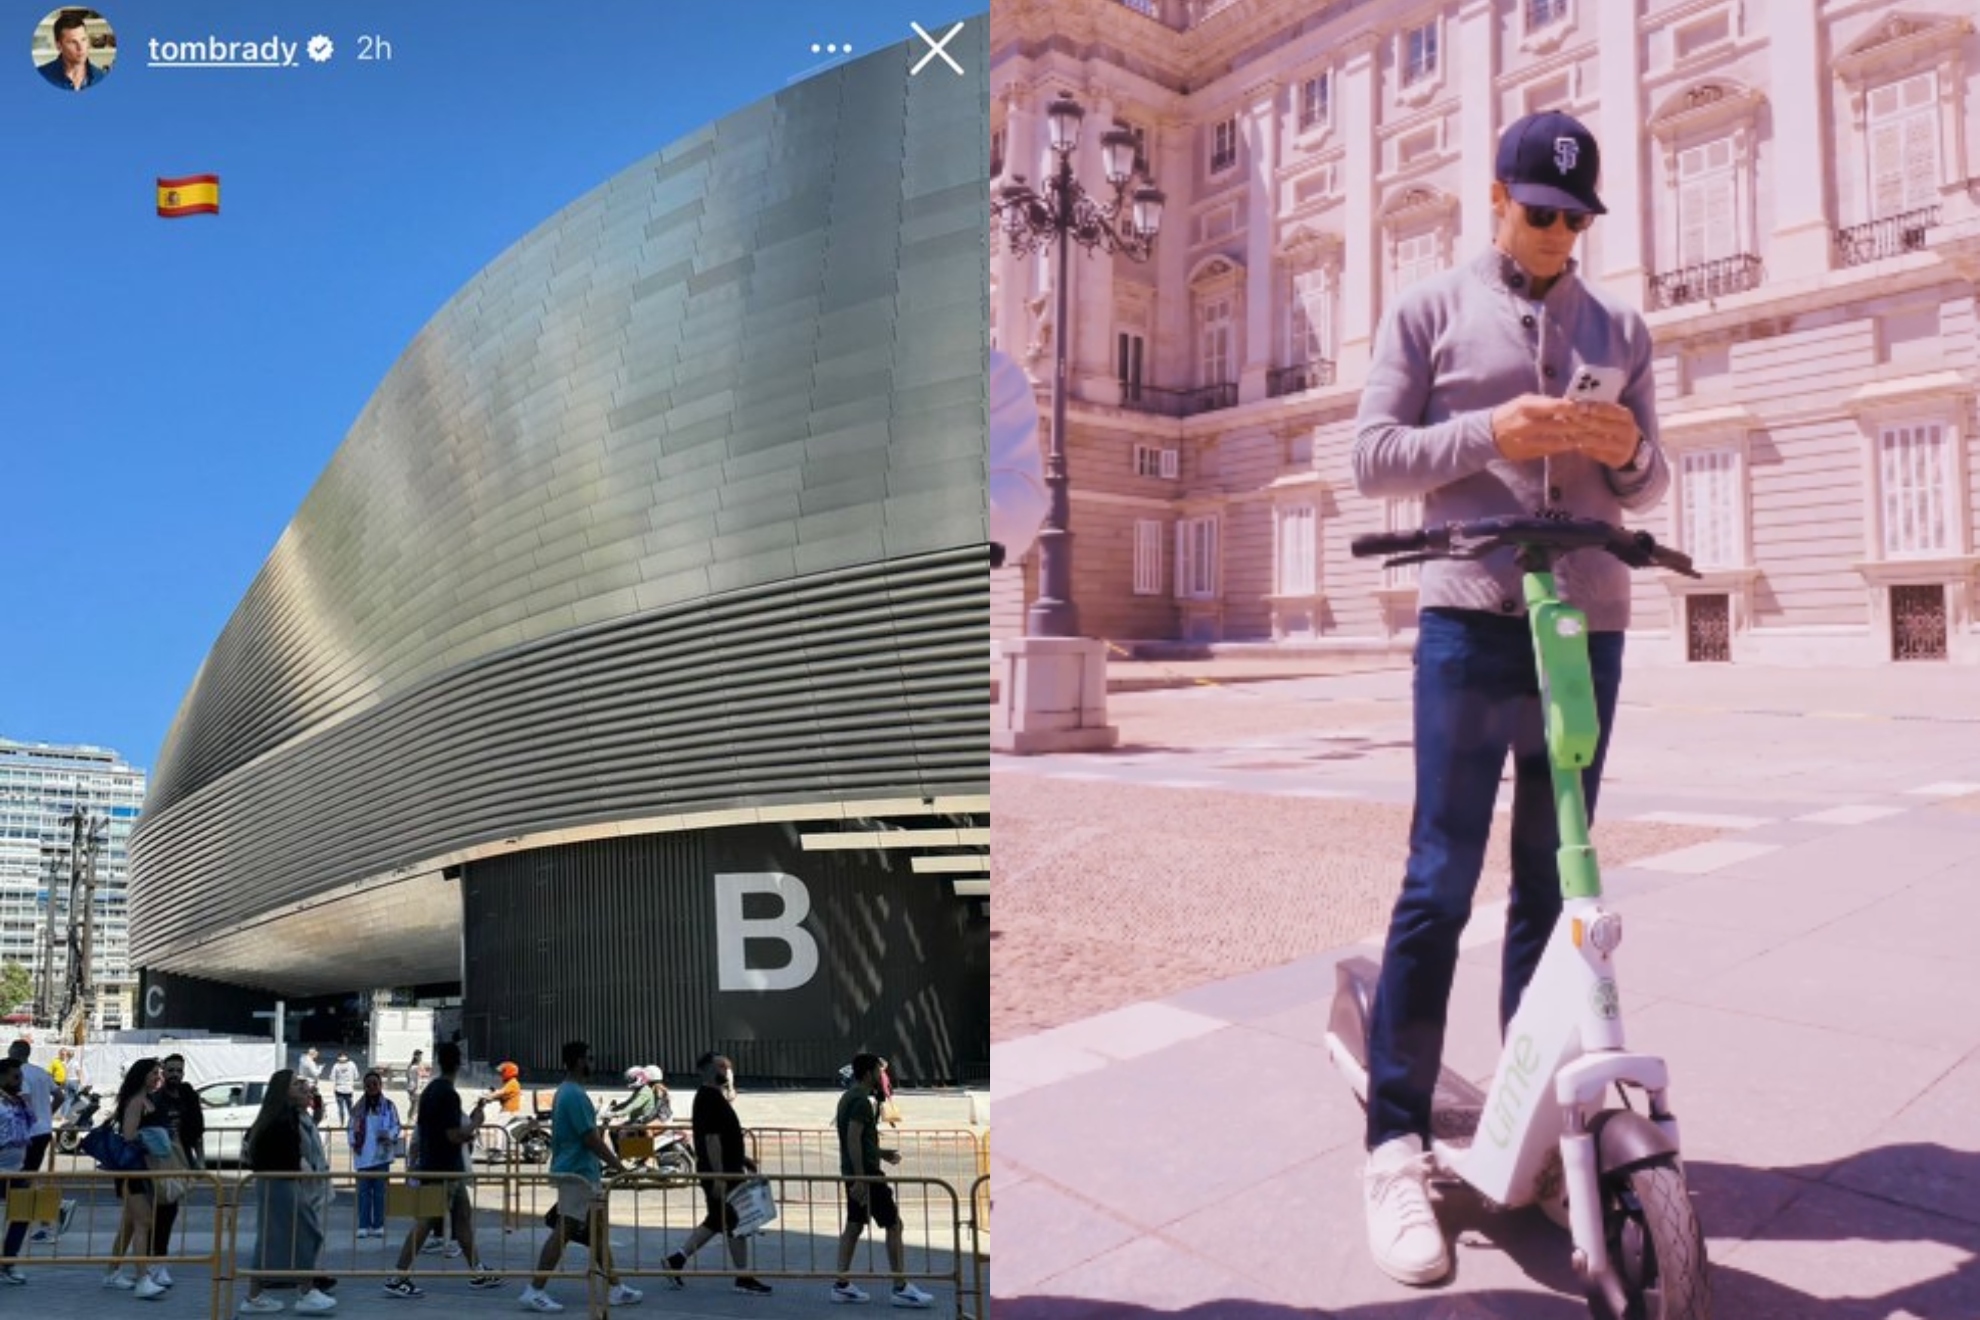 Tom Brady cant find a car in Madrid and rides a scooter through the streets to get to the Bernabeu